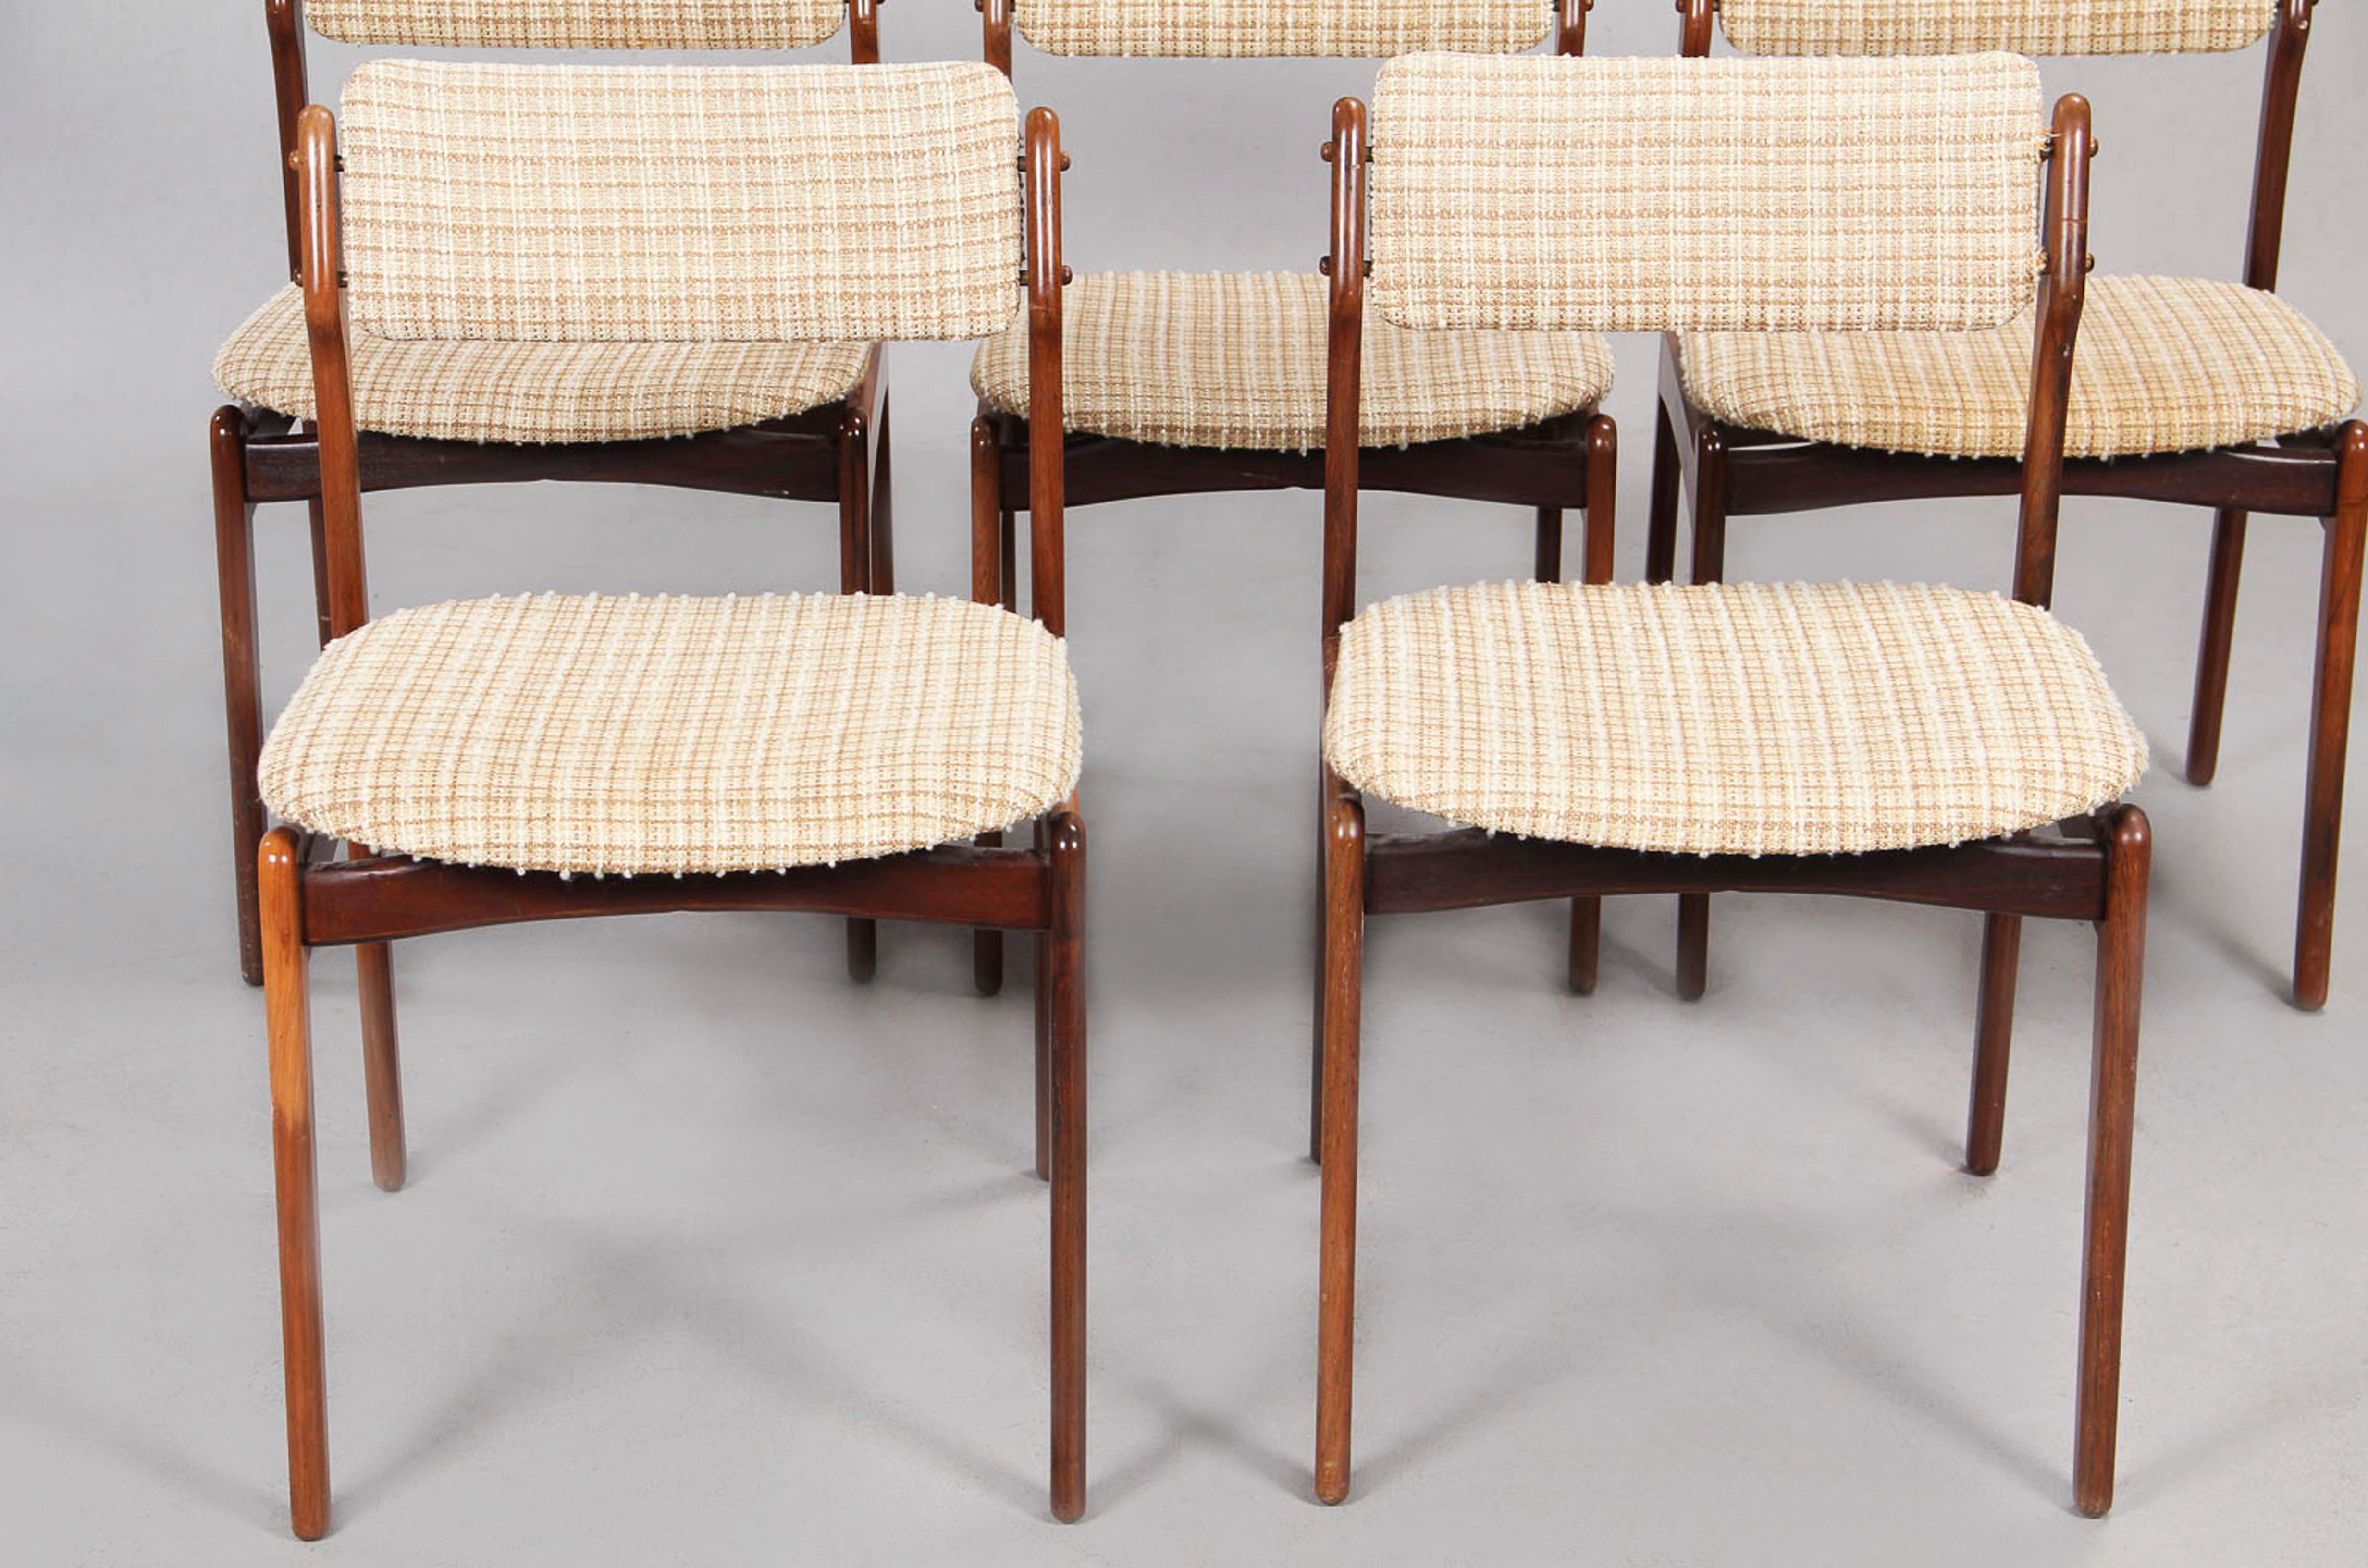 Set of four dining chairs model 49 in rosewood with floating seat designed by Erik Buch for Oddense Maskinsnedkeri in Denmark, 1960s
These items are in original condition, can be sold as they are or fully restored, the price shown is in original